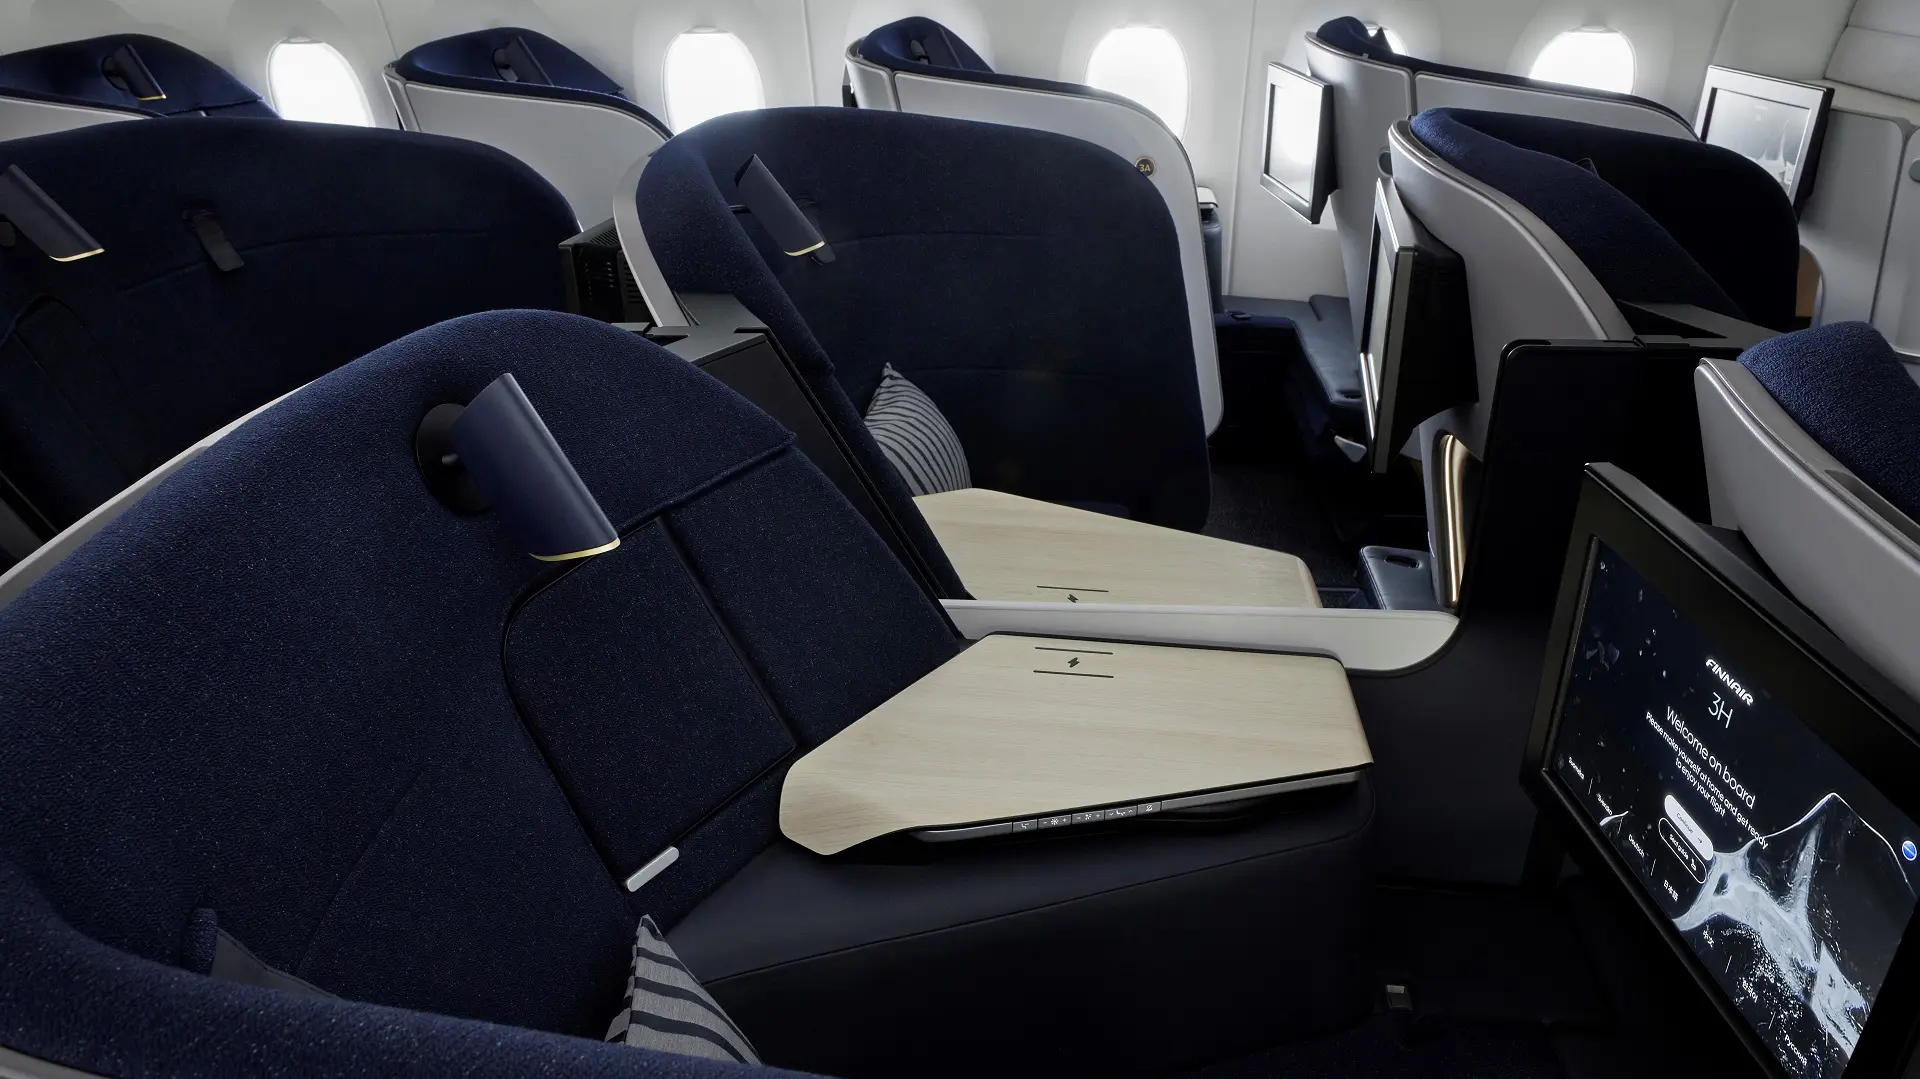 Airline review Cabin & Seat - Finnair - 3